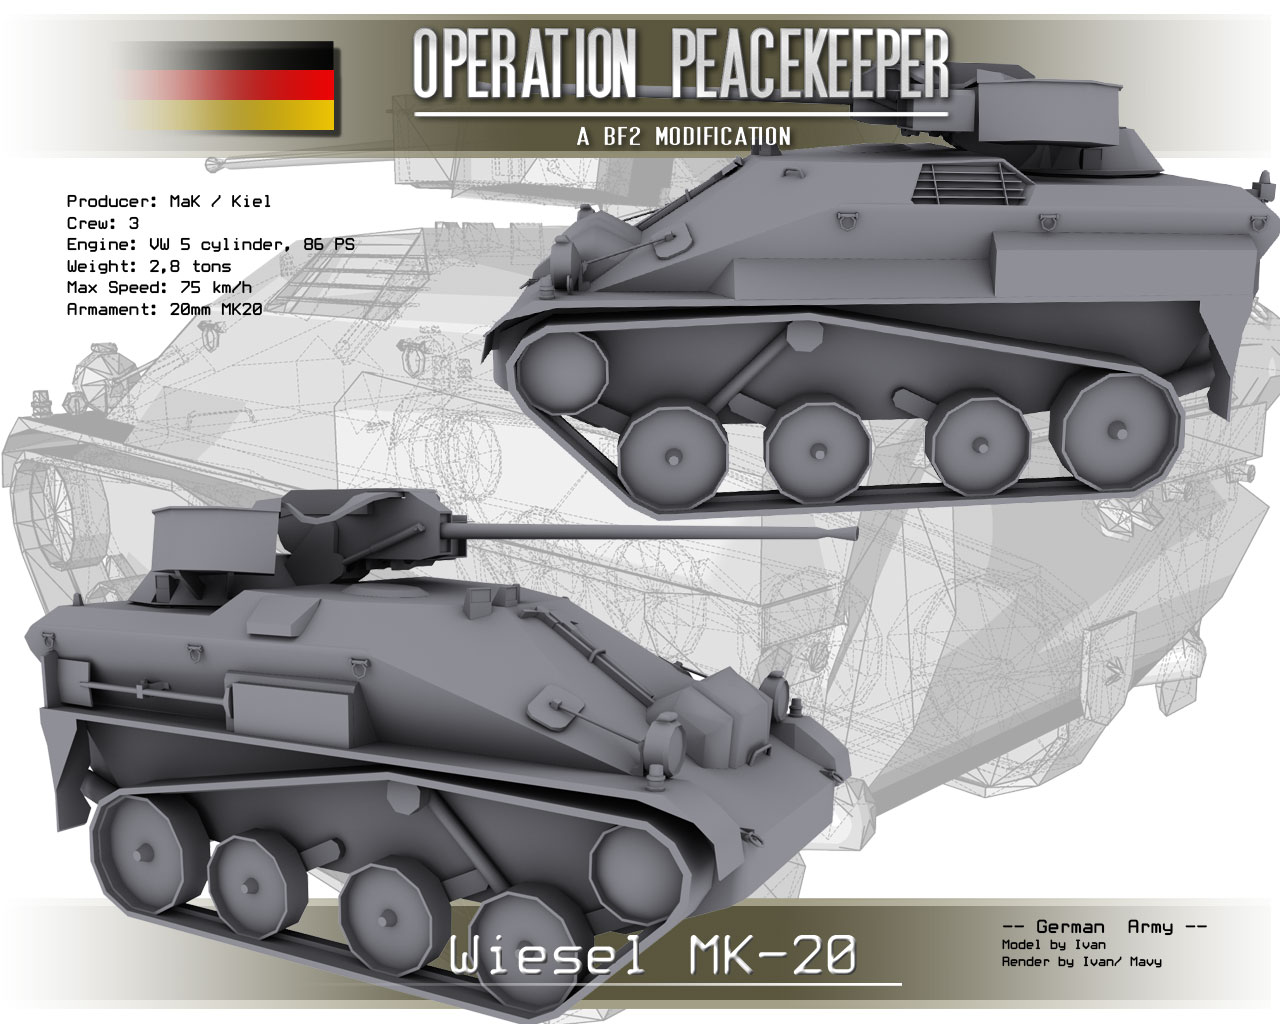 Wiesel MK-20 tiny tank image - Operation Peacekeeper 2 mod for